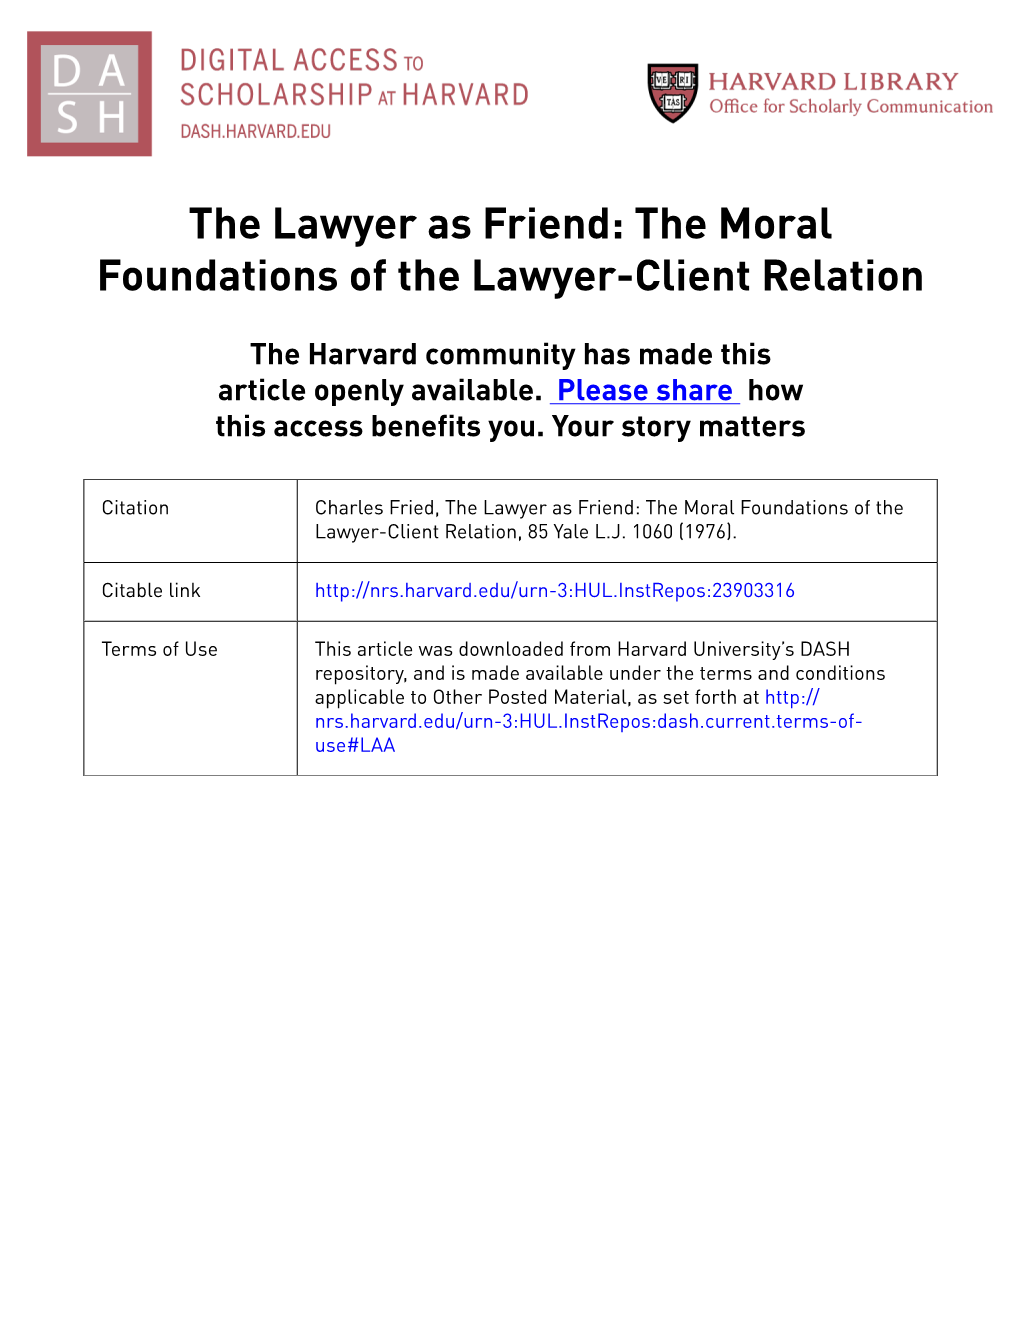 The Lawyer As Friend: the Moral Foundations of the Lawyer-Client Relation